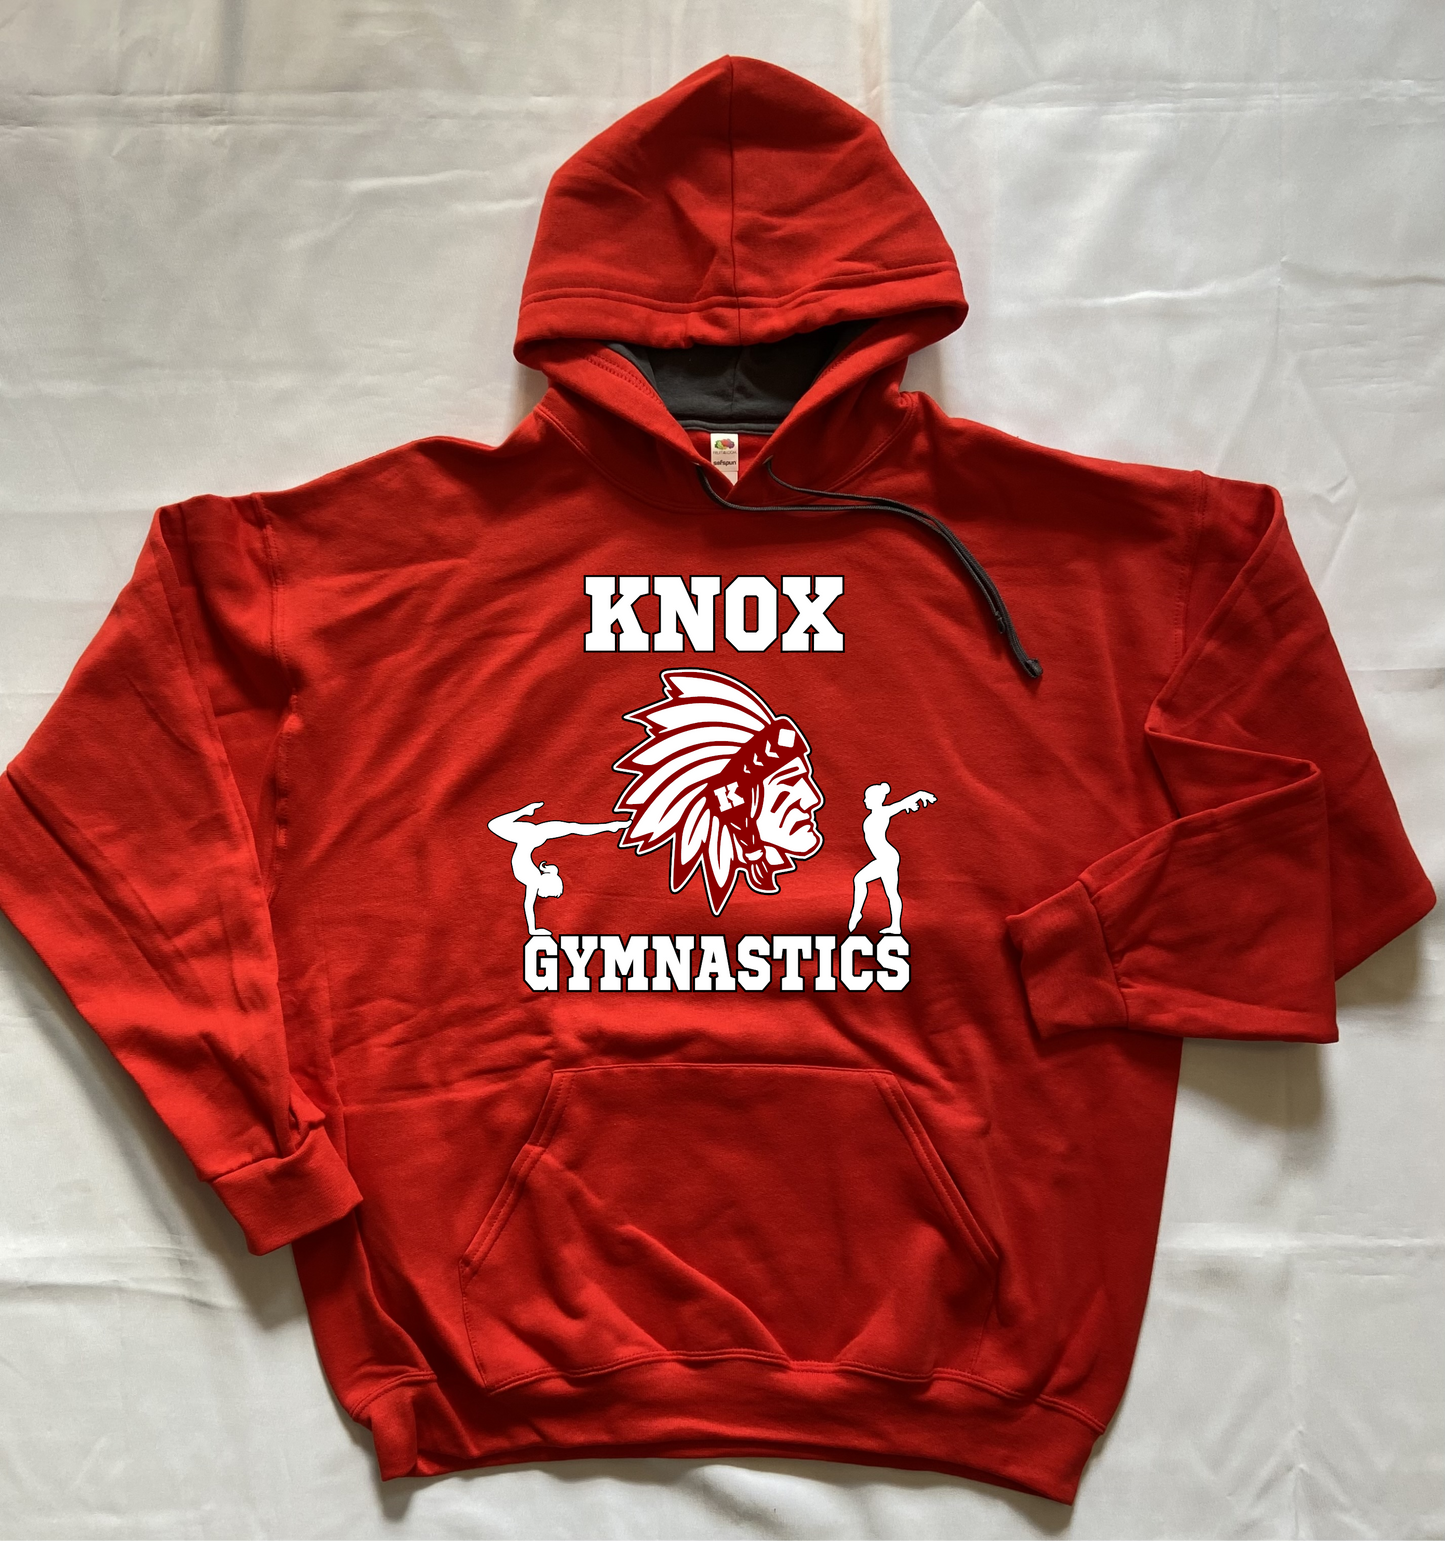 Knox Redskins Gymnastics Hoodie - Red - Adult and Youth Sizes